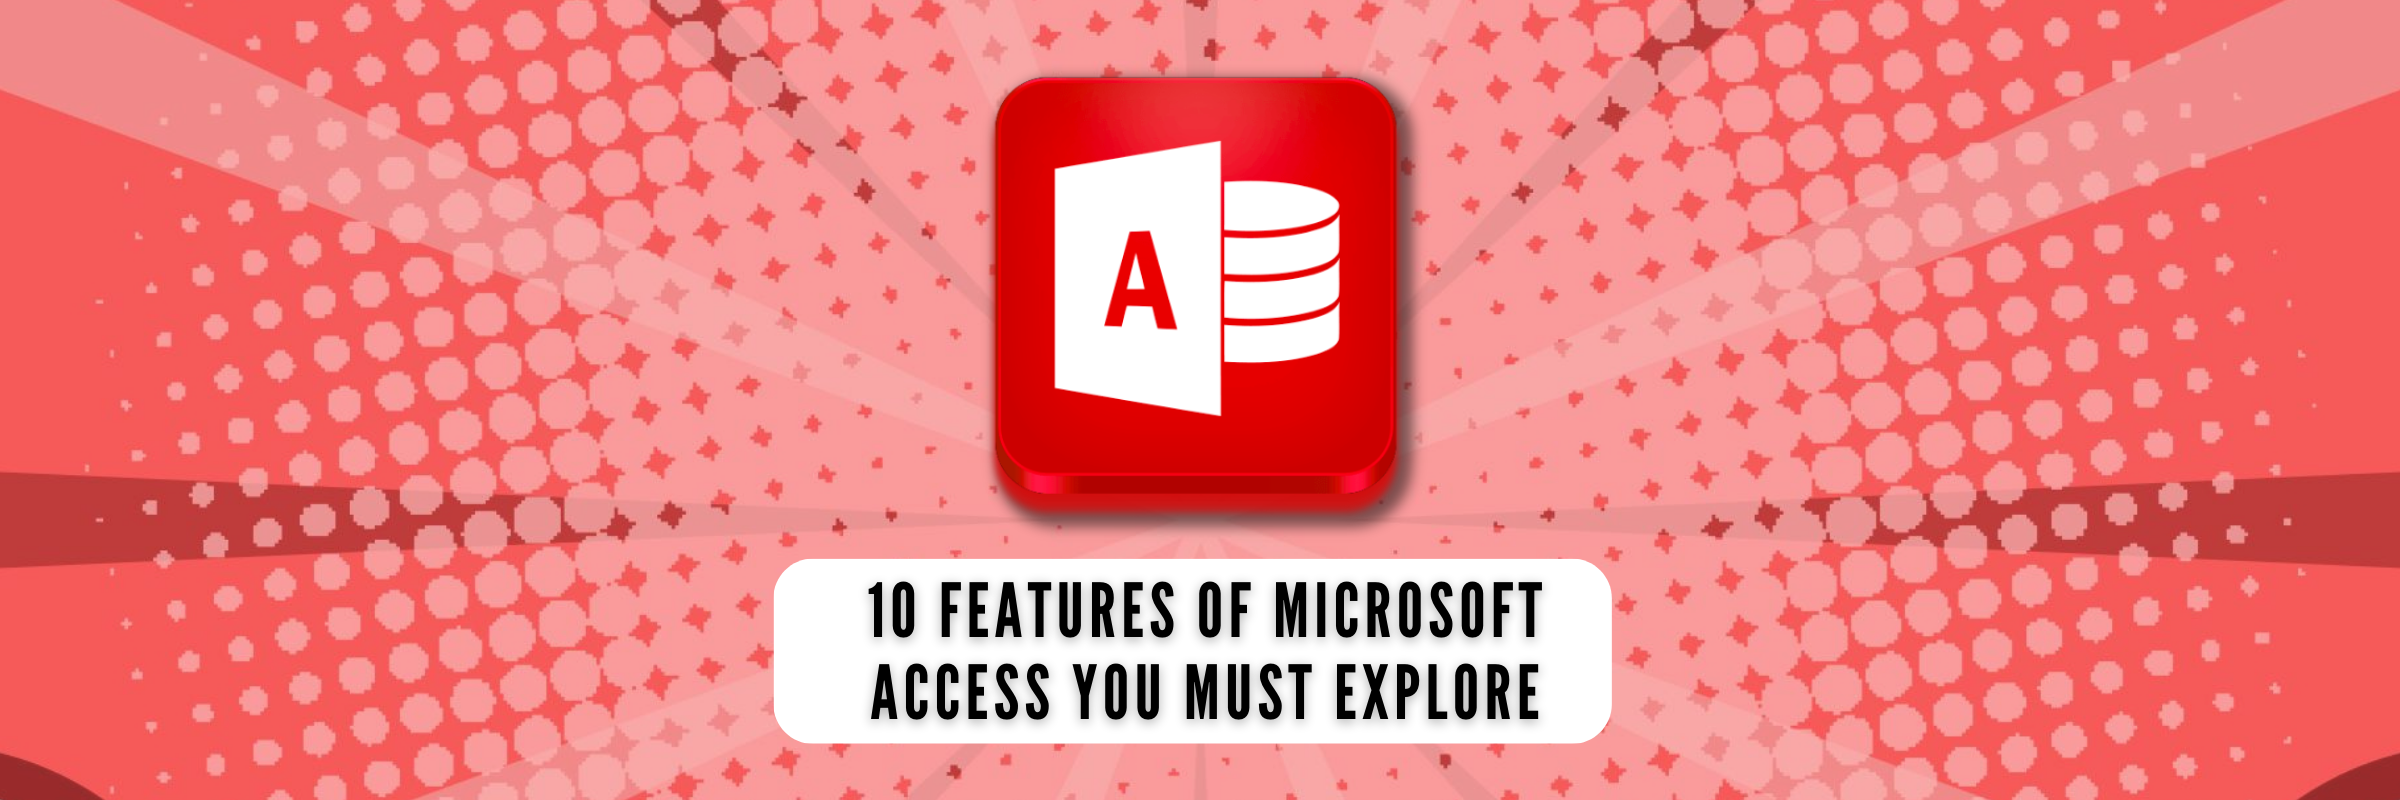 10 Features of Microsoft Access You Must Explore